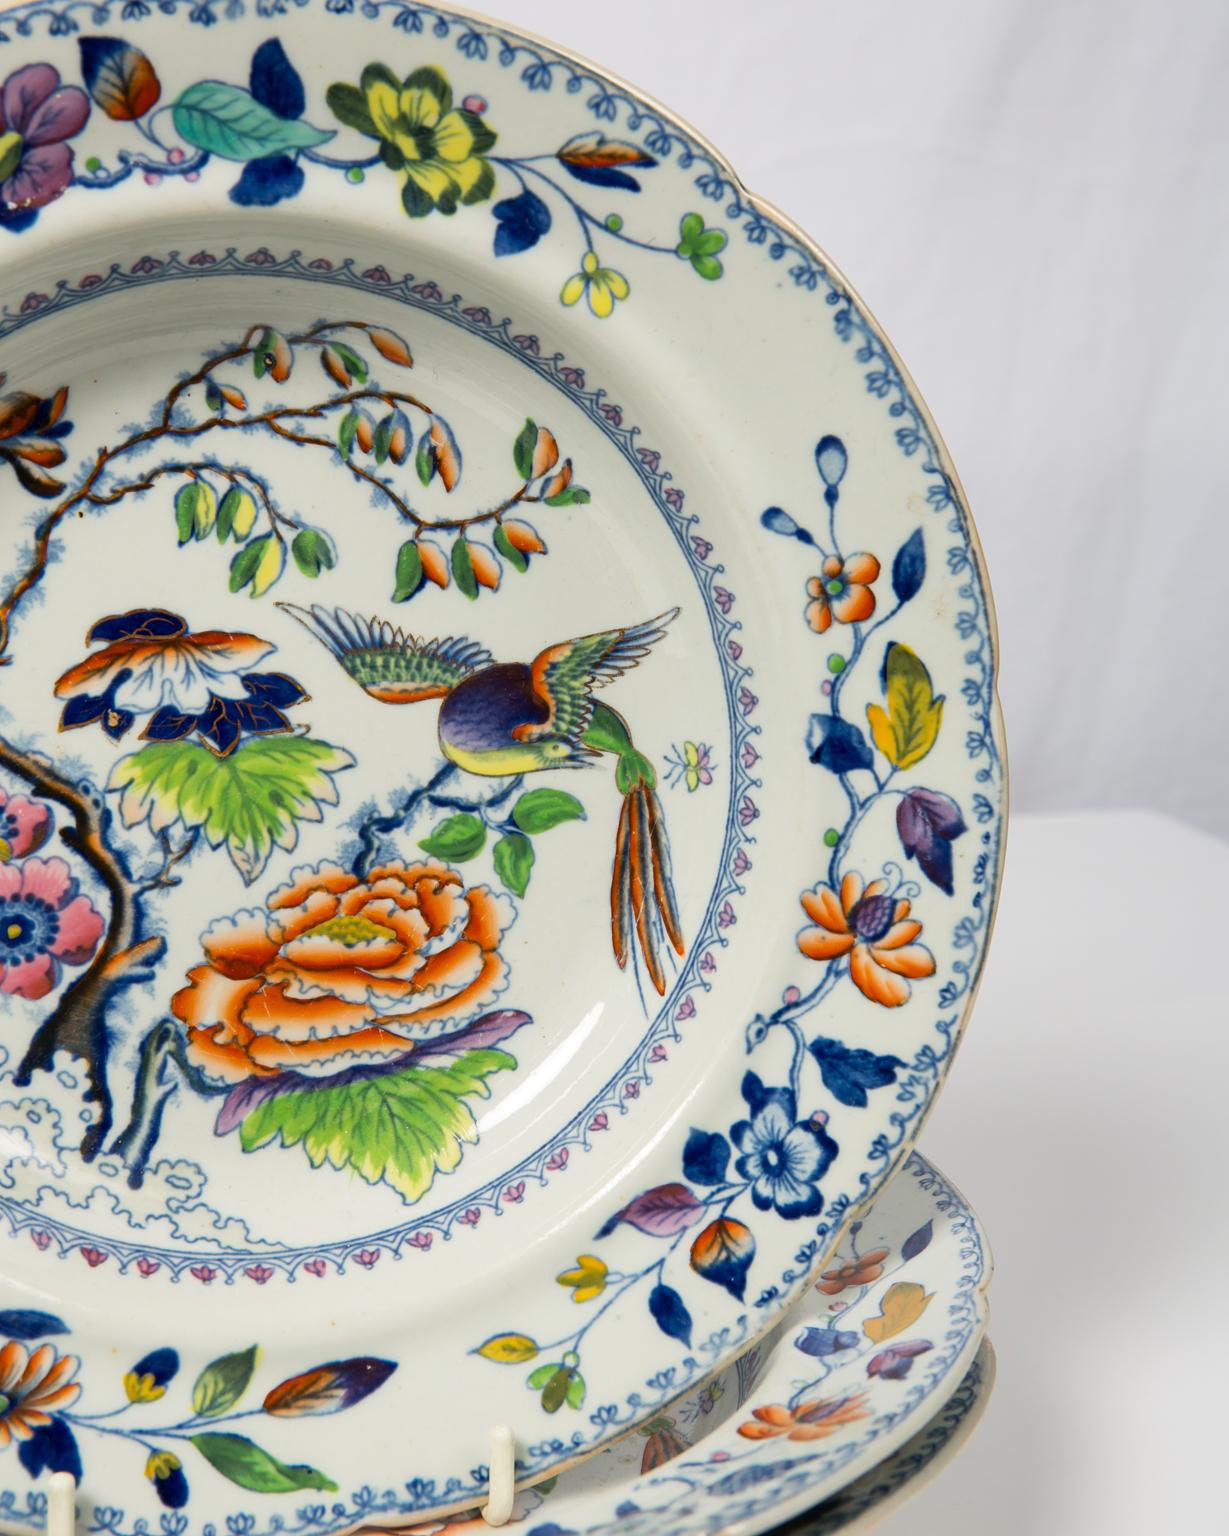 The flying bird pattern features a longtailed bird in flight above a flower filled garden. It is a lively, colorful pattern. This set of a dozen dishes for pasta or soup showcases the exceptional and enduring charm of this chinoiserie design. It is